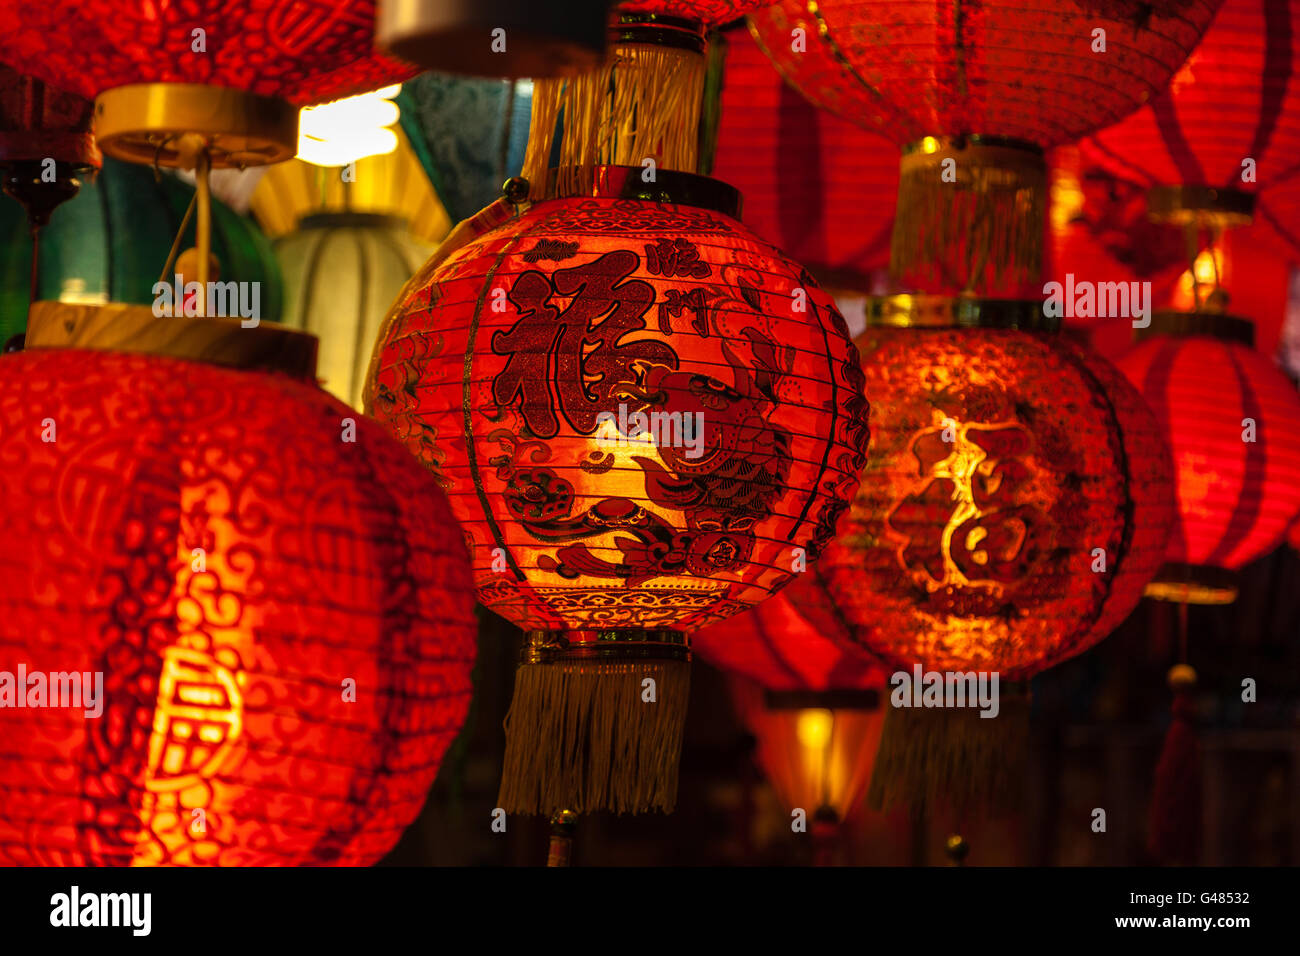 Focus on a Chinese lantern with the words "Blessings" printed on it among an array of red lanterns in the background. Stock Photo